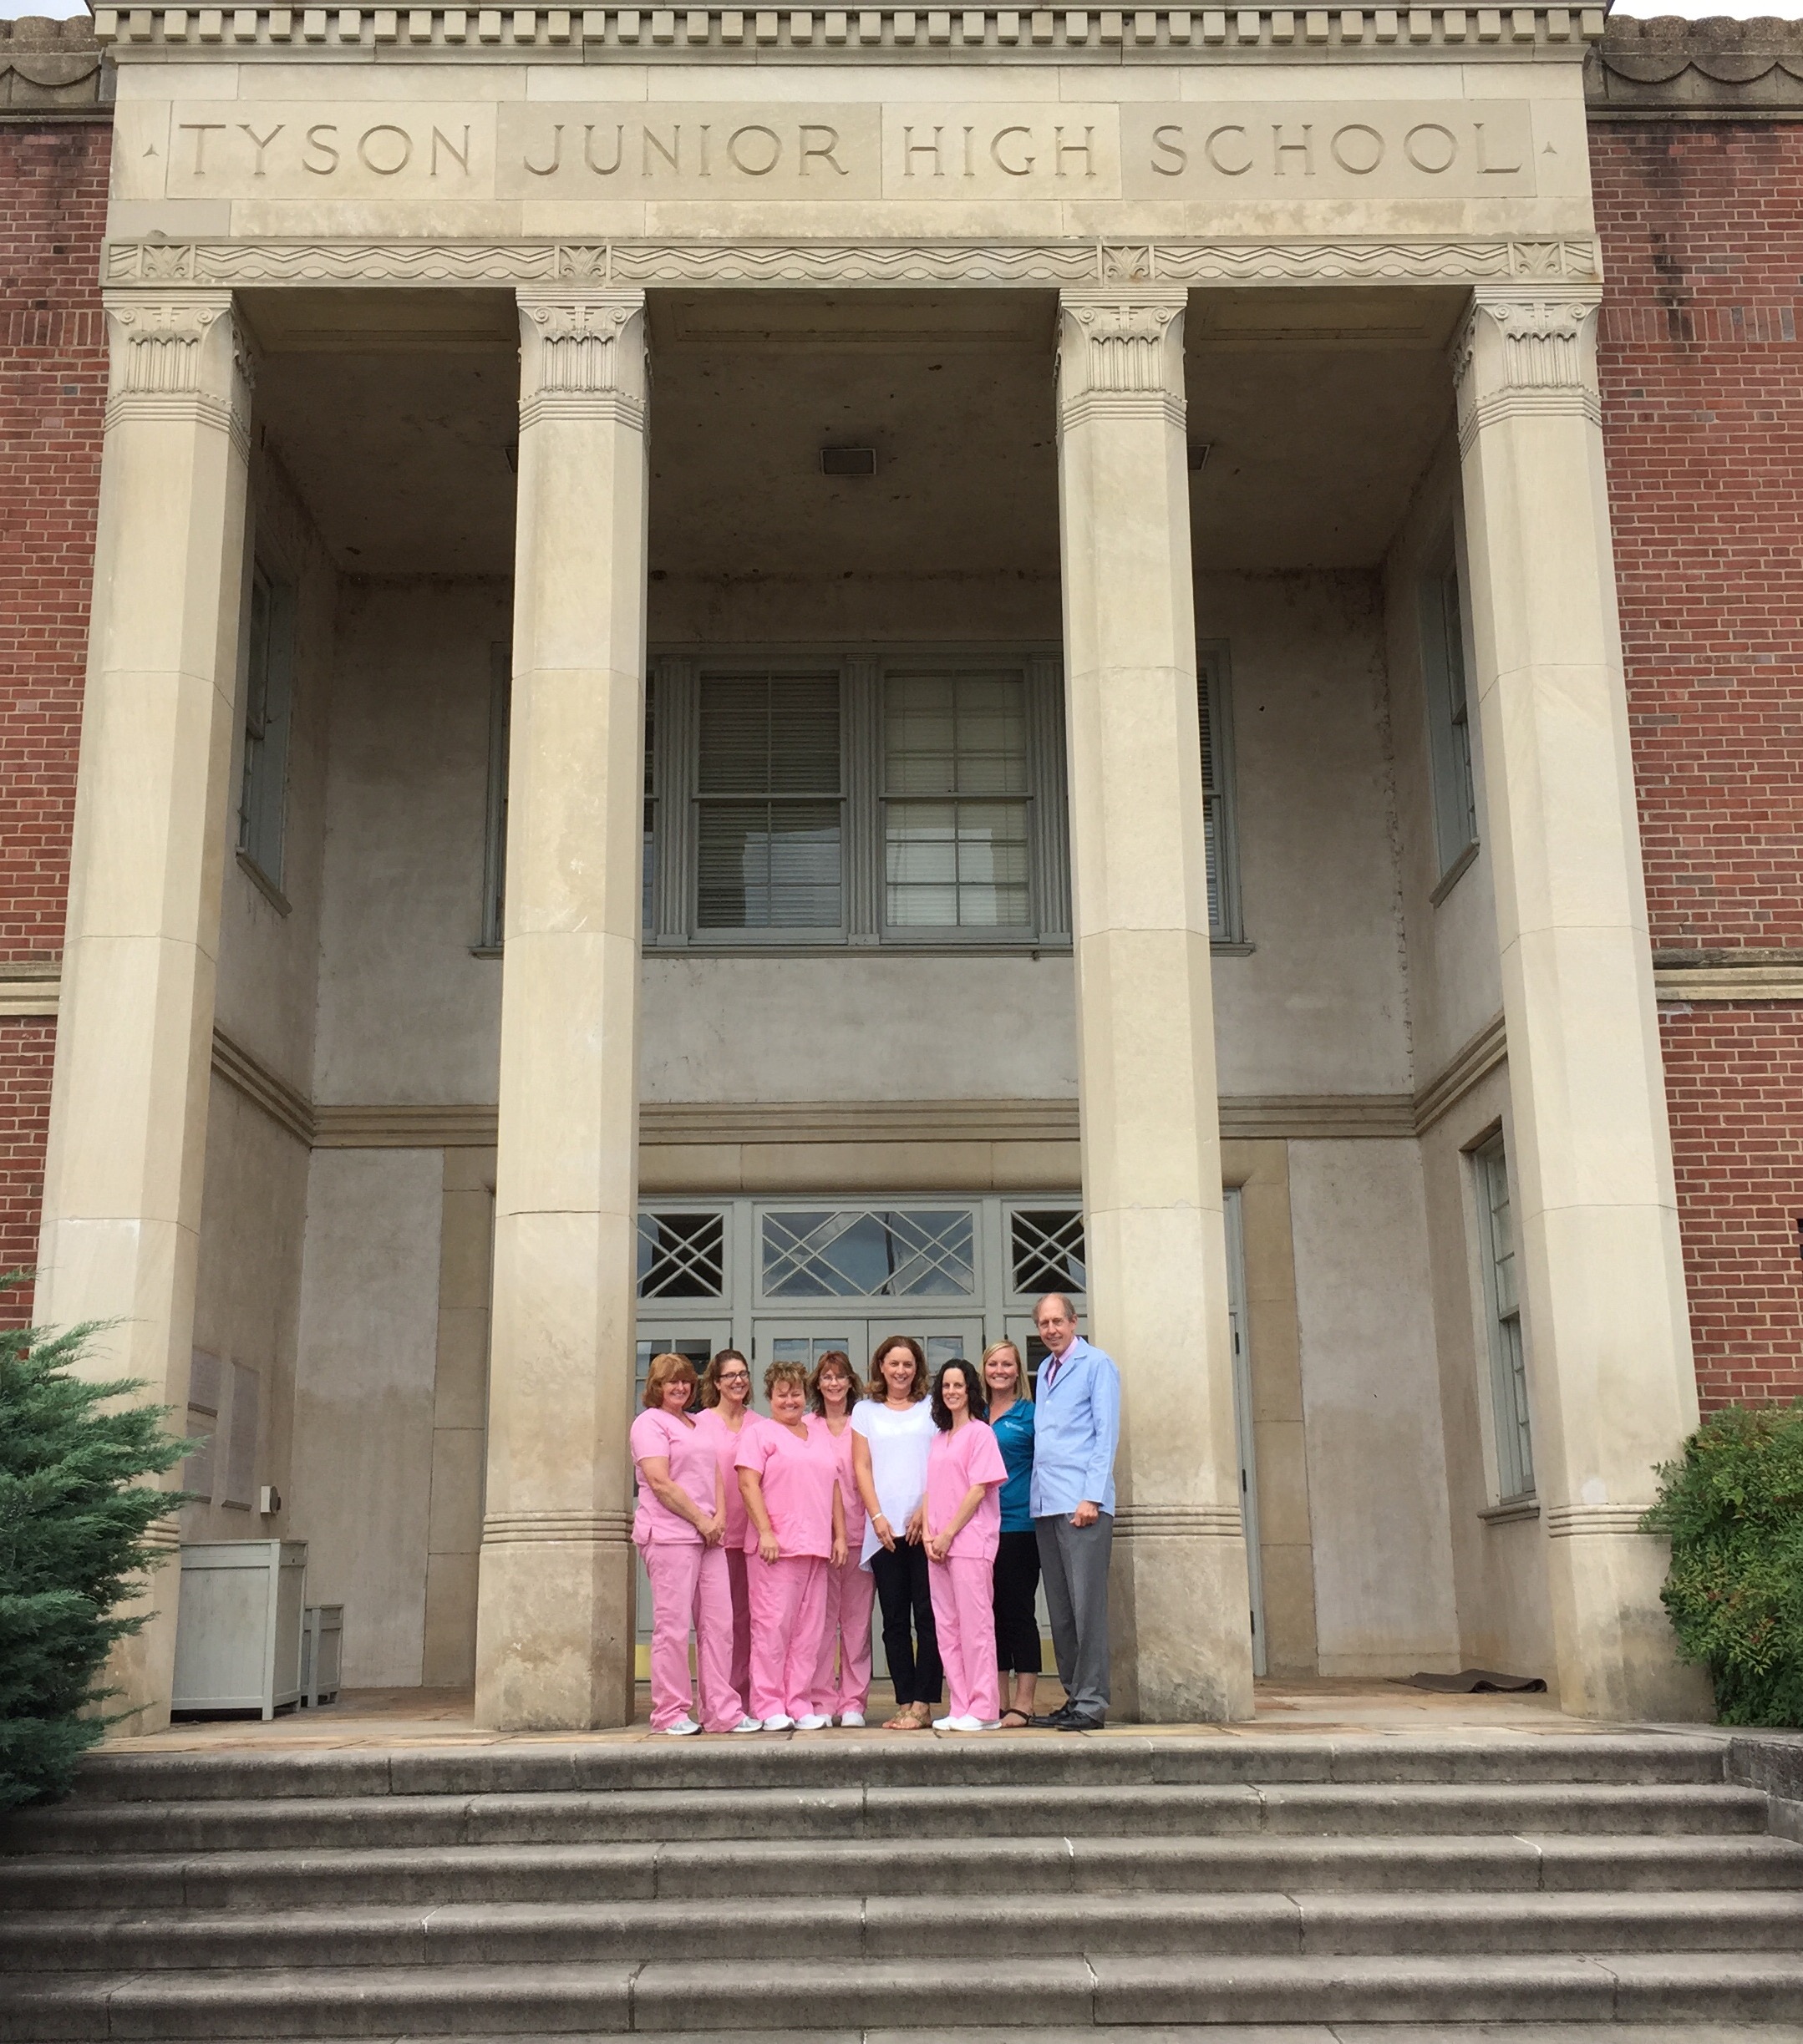 Dr. Fain's office is located in a historic school building! 